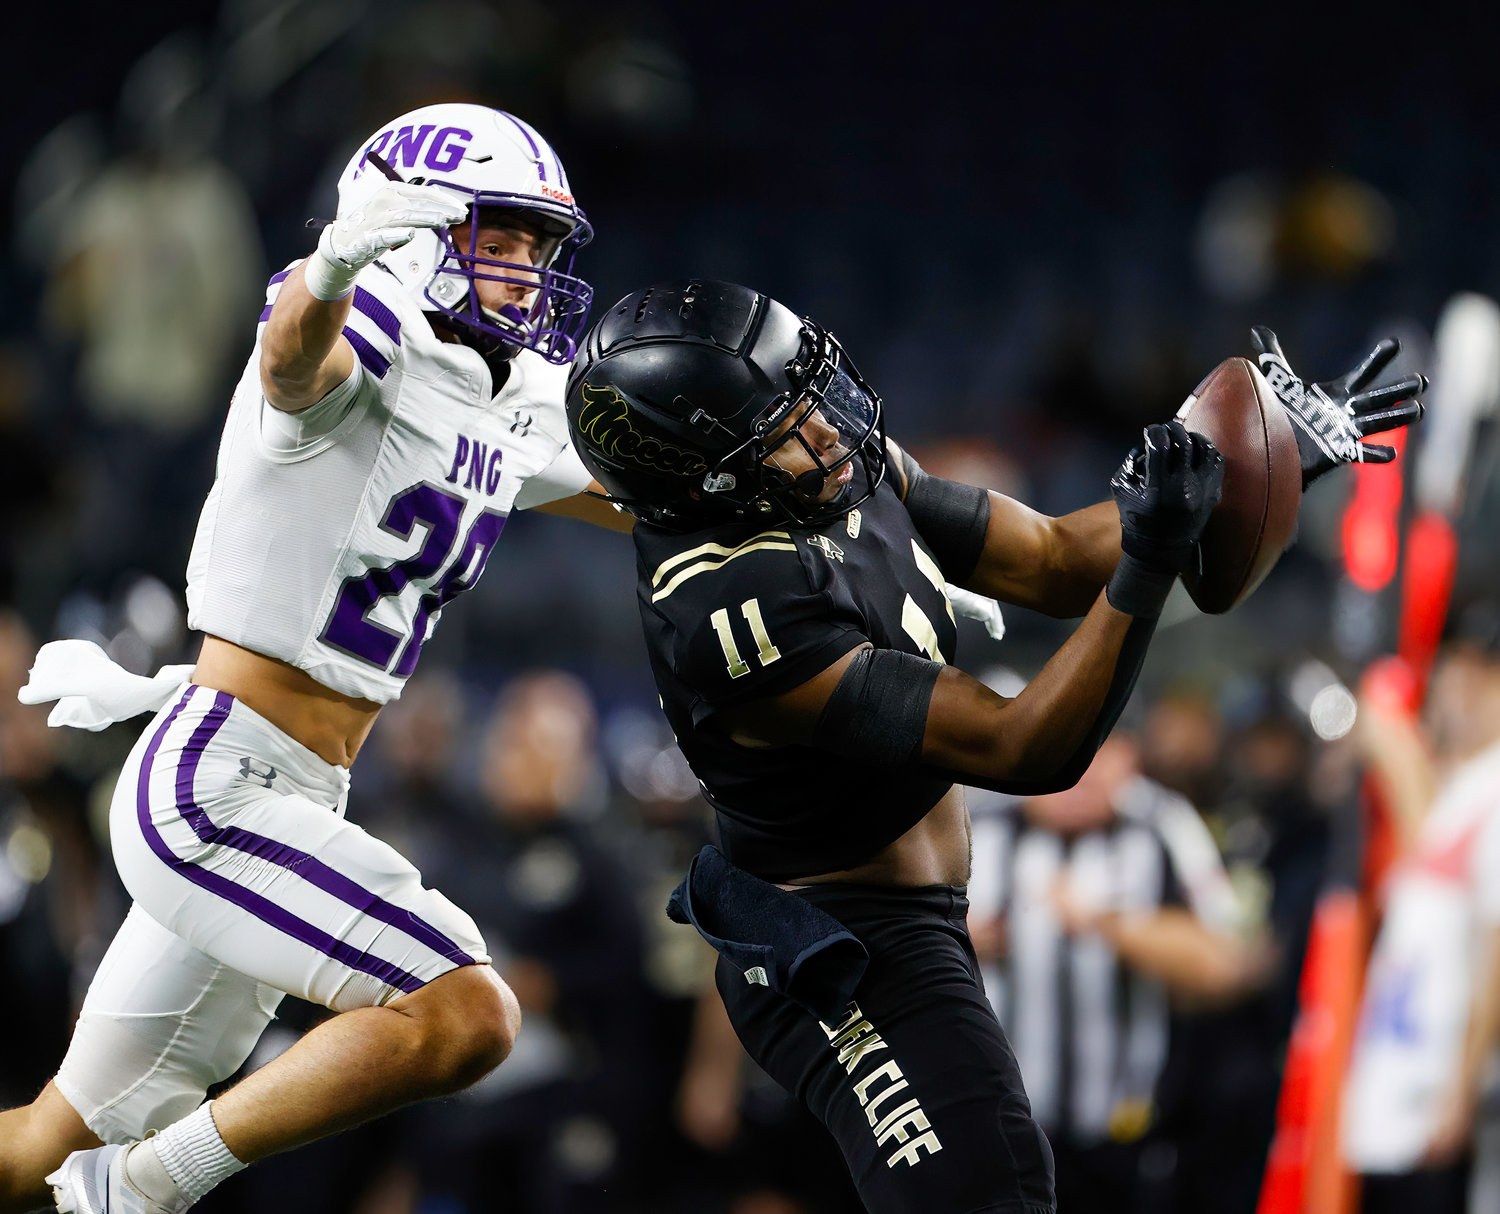 South Oak Cliff wide receiver Jamyri Cauley (11) makes a catch for a first down over Port Neches-Groves defensive back Reid Richard (28) during the Class 5A Division II football state championship game between South Oak Cliff and Port Neches-Groves in Arlington, Texas, on Dec. 16, 2022.